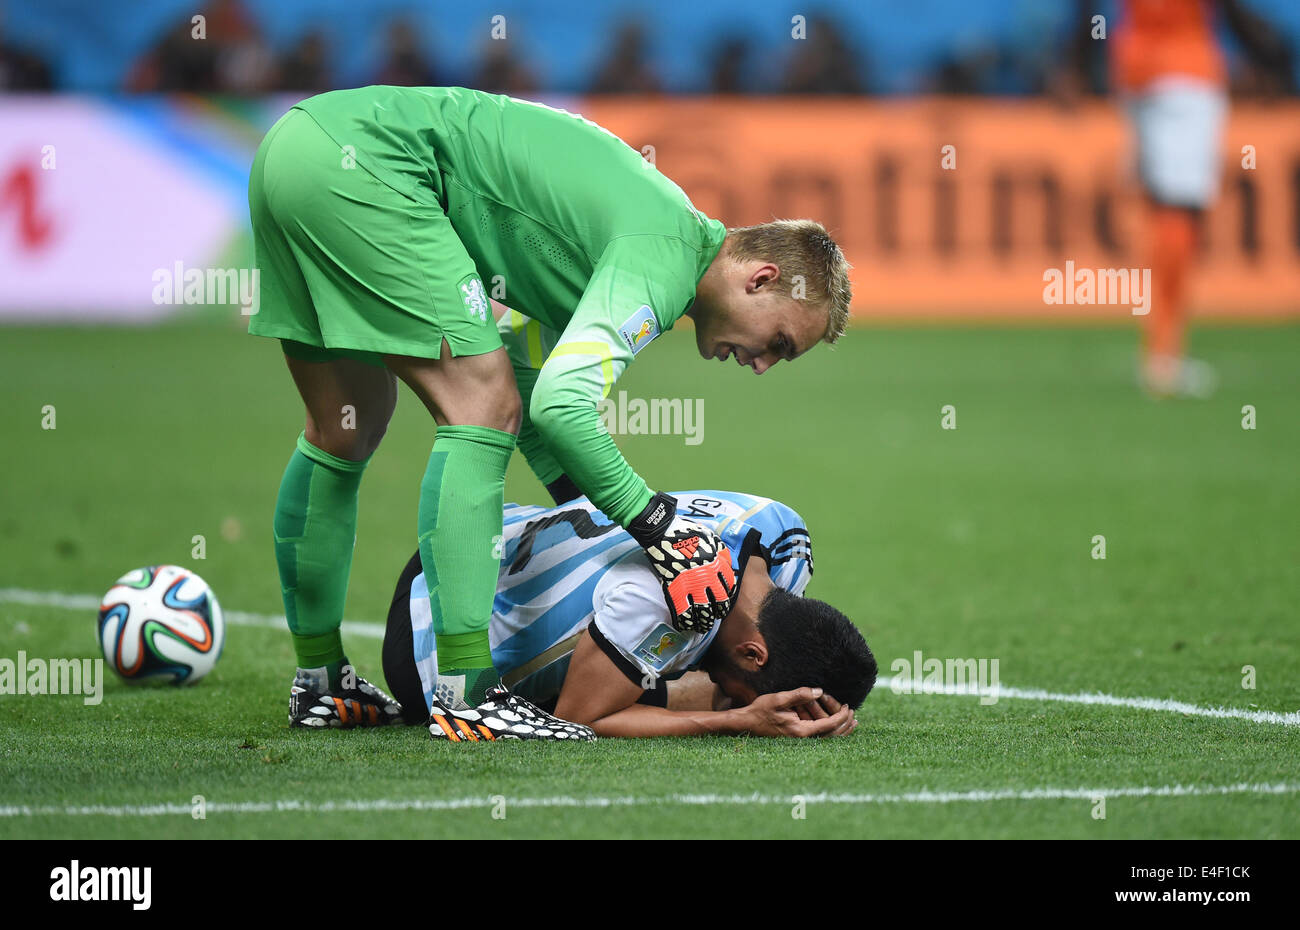 Sao Paulo, Brazil. 09th July, 2014. Goalkeeper Jasper Cillessen (L) of Netherlands looks at Ezequiel Garay of Argentina lying on the pitch after picking up an injury during the FIFA World Cup 2014 semi-final soccer match between the Netherlands and Argentina at the Arena Corinthians in Sao Paulo, Brazil, 09 July 2014. Photo: Marius Becker/dpa/Alamy Live News Stock Photo